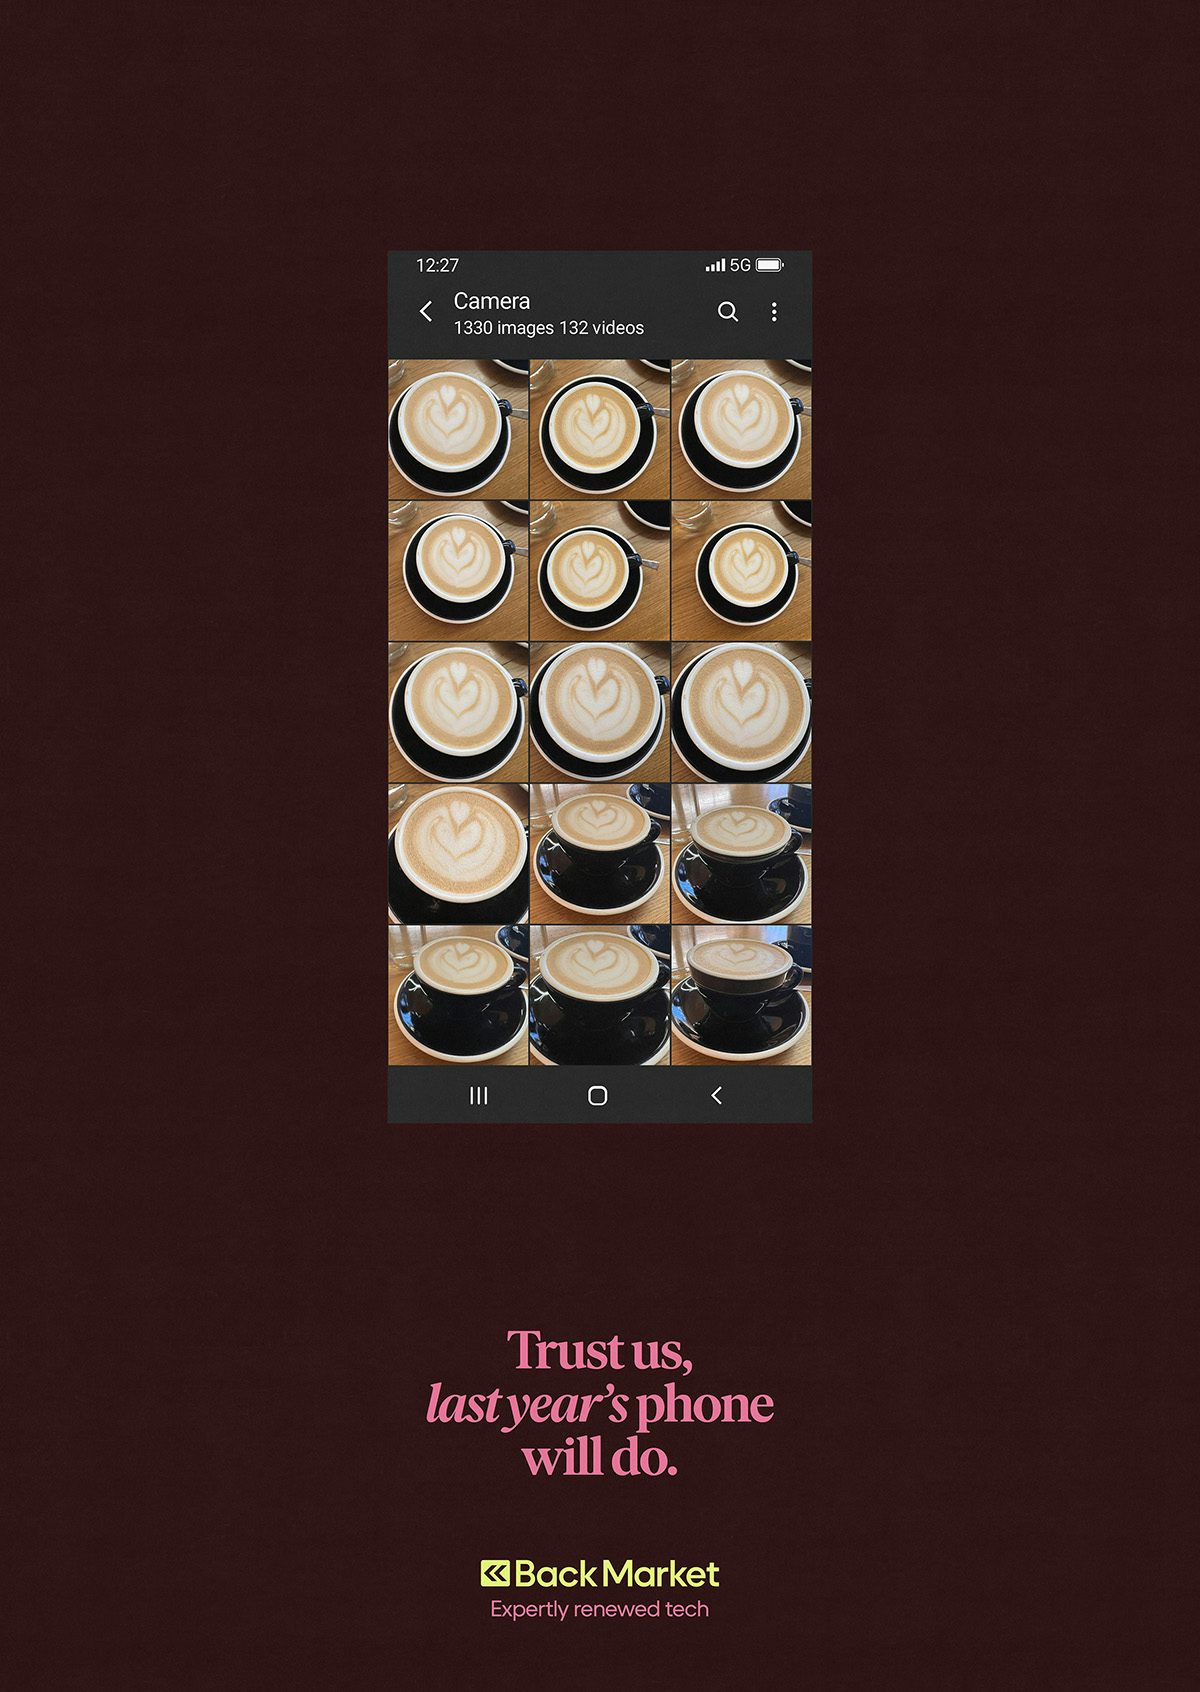 Image from Back Market's campaign showing a picture of a camera roll filled with near identical photos of a frothy coffee, and the headline 'Trust us, last year's phone will do' on a maroon background